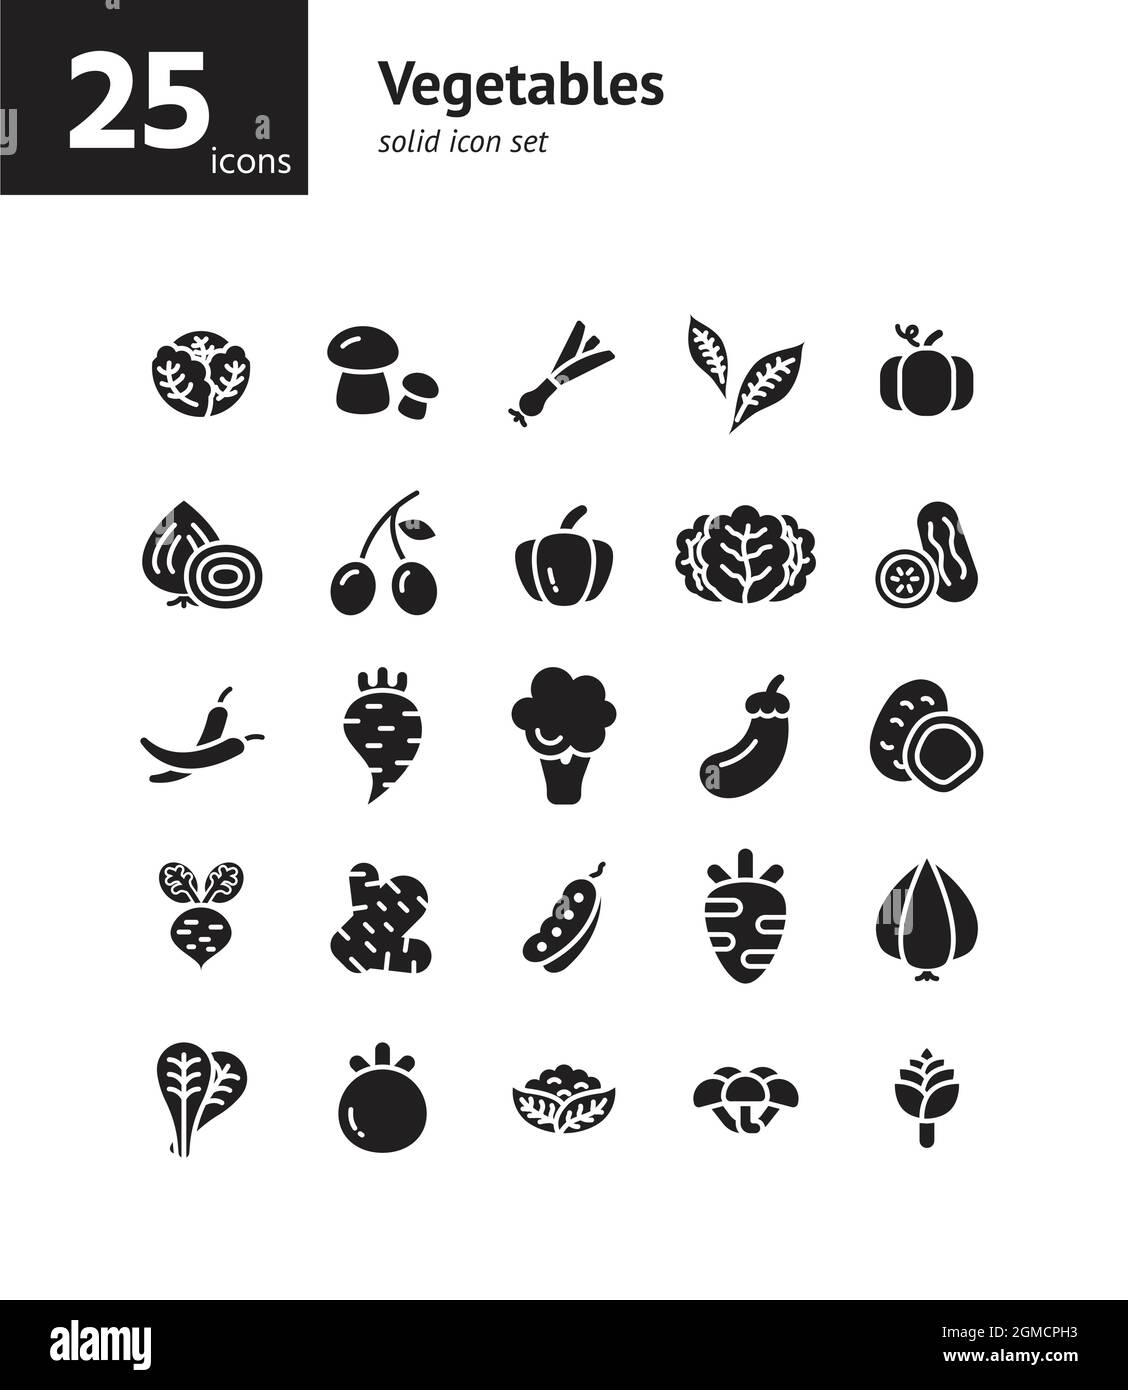 Vegetables solid icon set. Vector and Illustration. Stock Vector